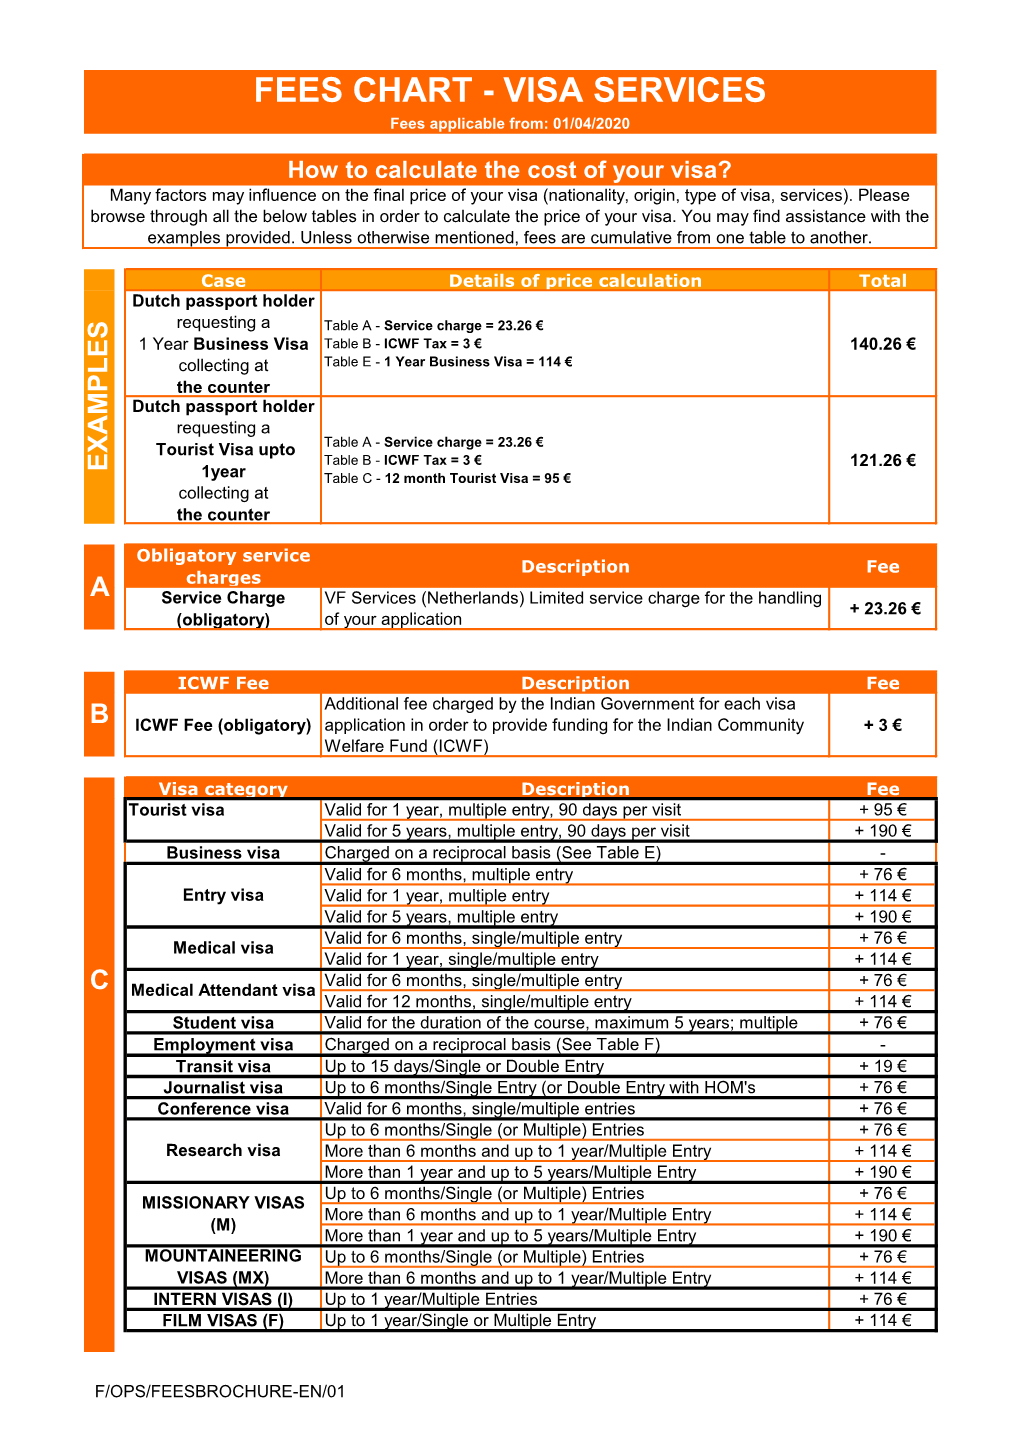 FEES CHART - VISA SERVICES Fees Applicable From: 01/04/2020